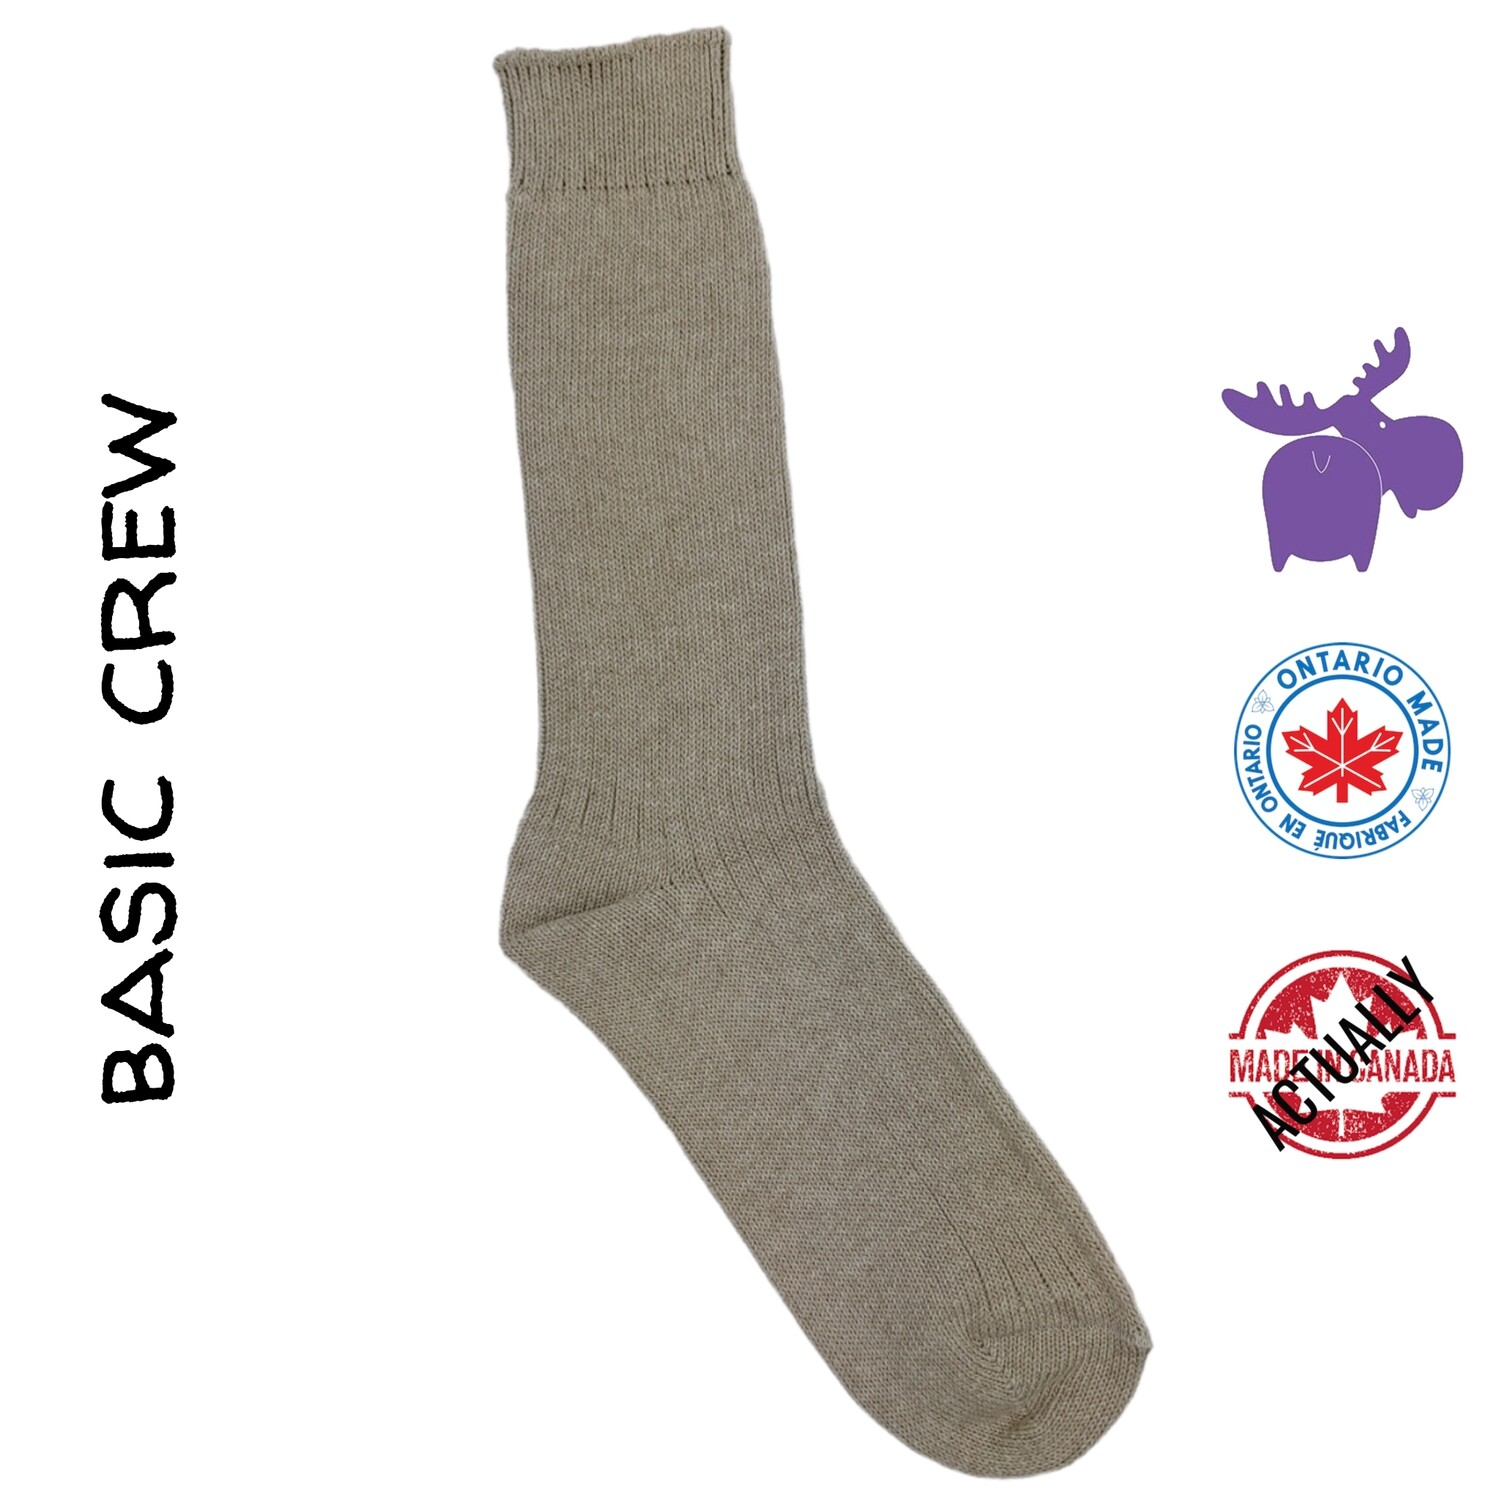 Basic Rib Knit Crew Sock in 2 colors | L adult size | Actually Made in Canada by Purple Moose